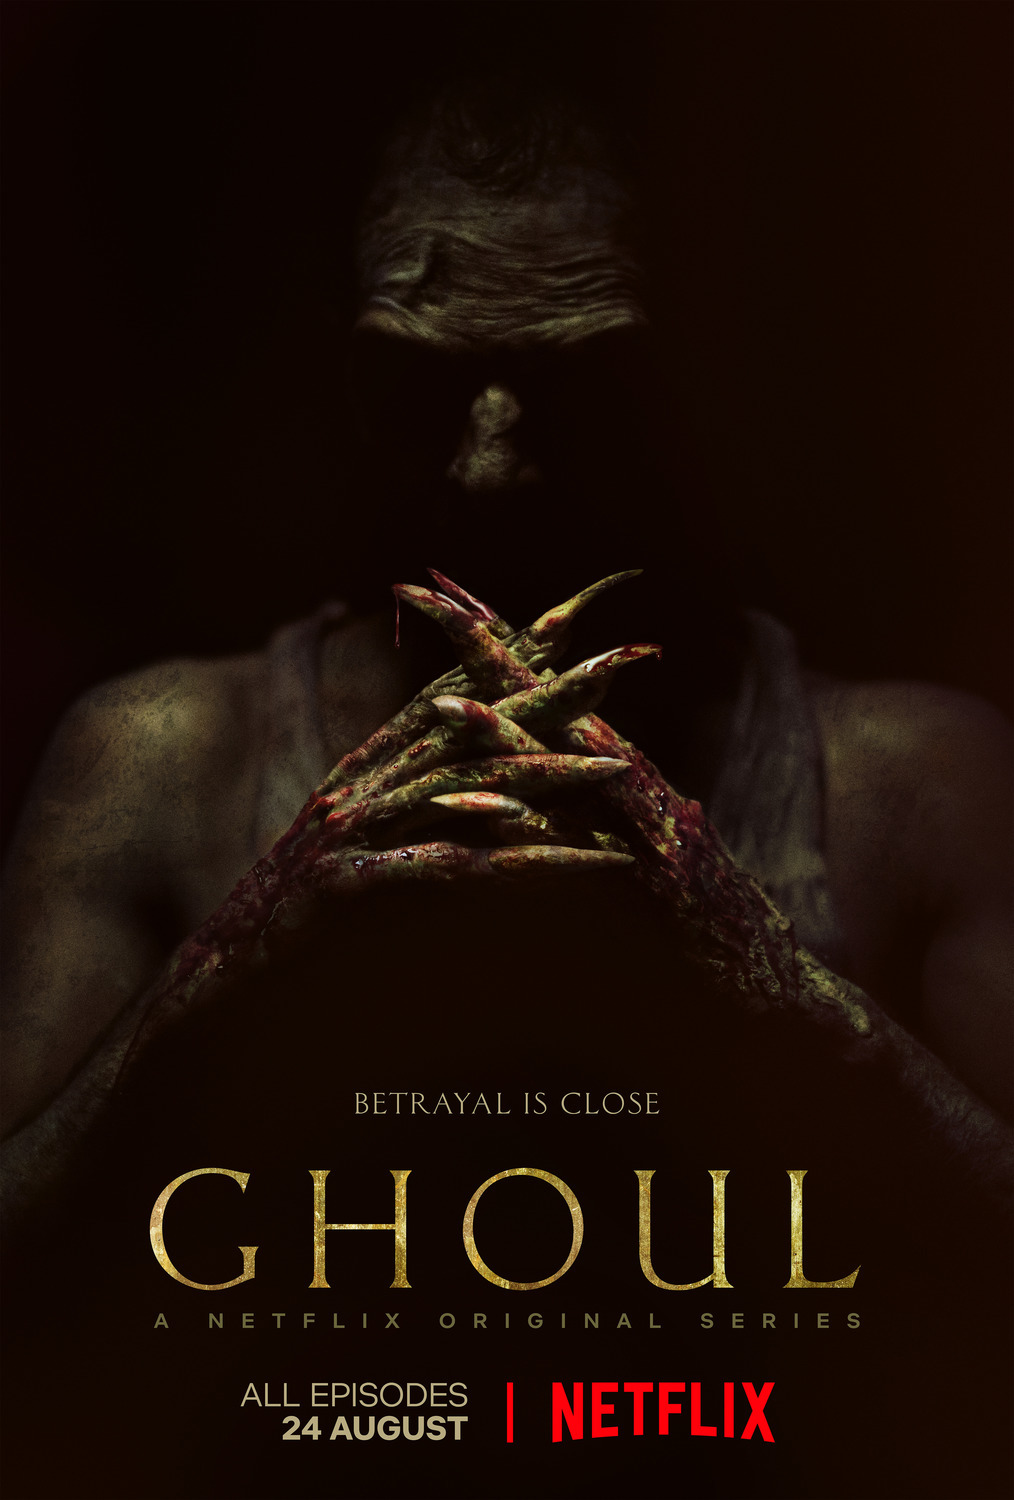 Ghoul on netflix